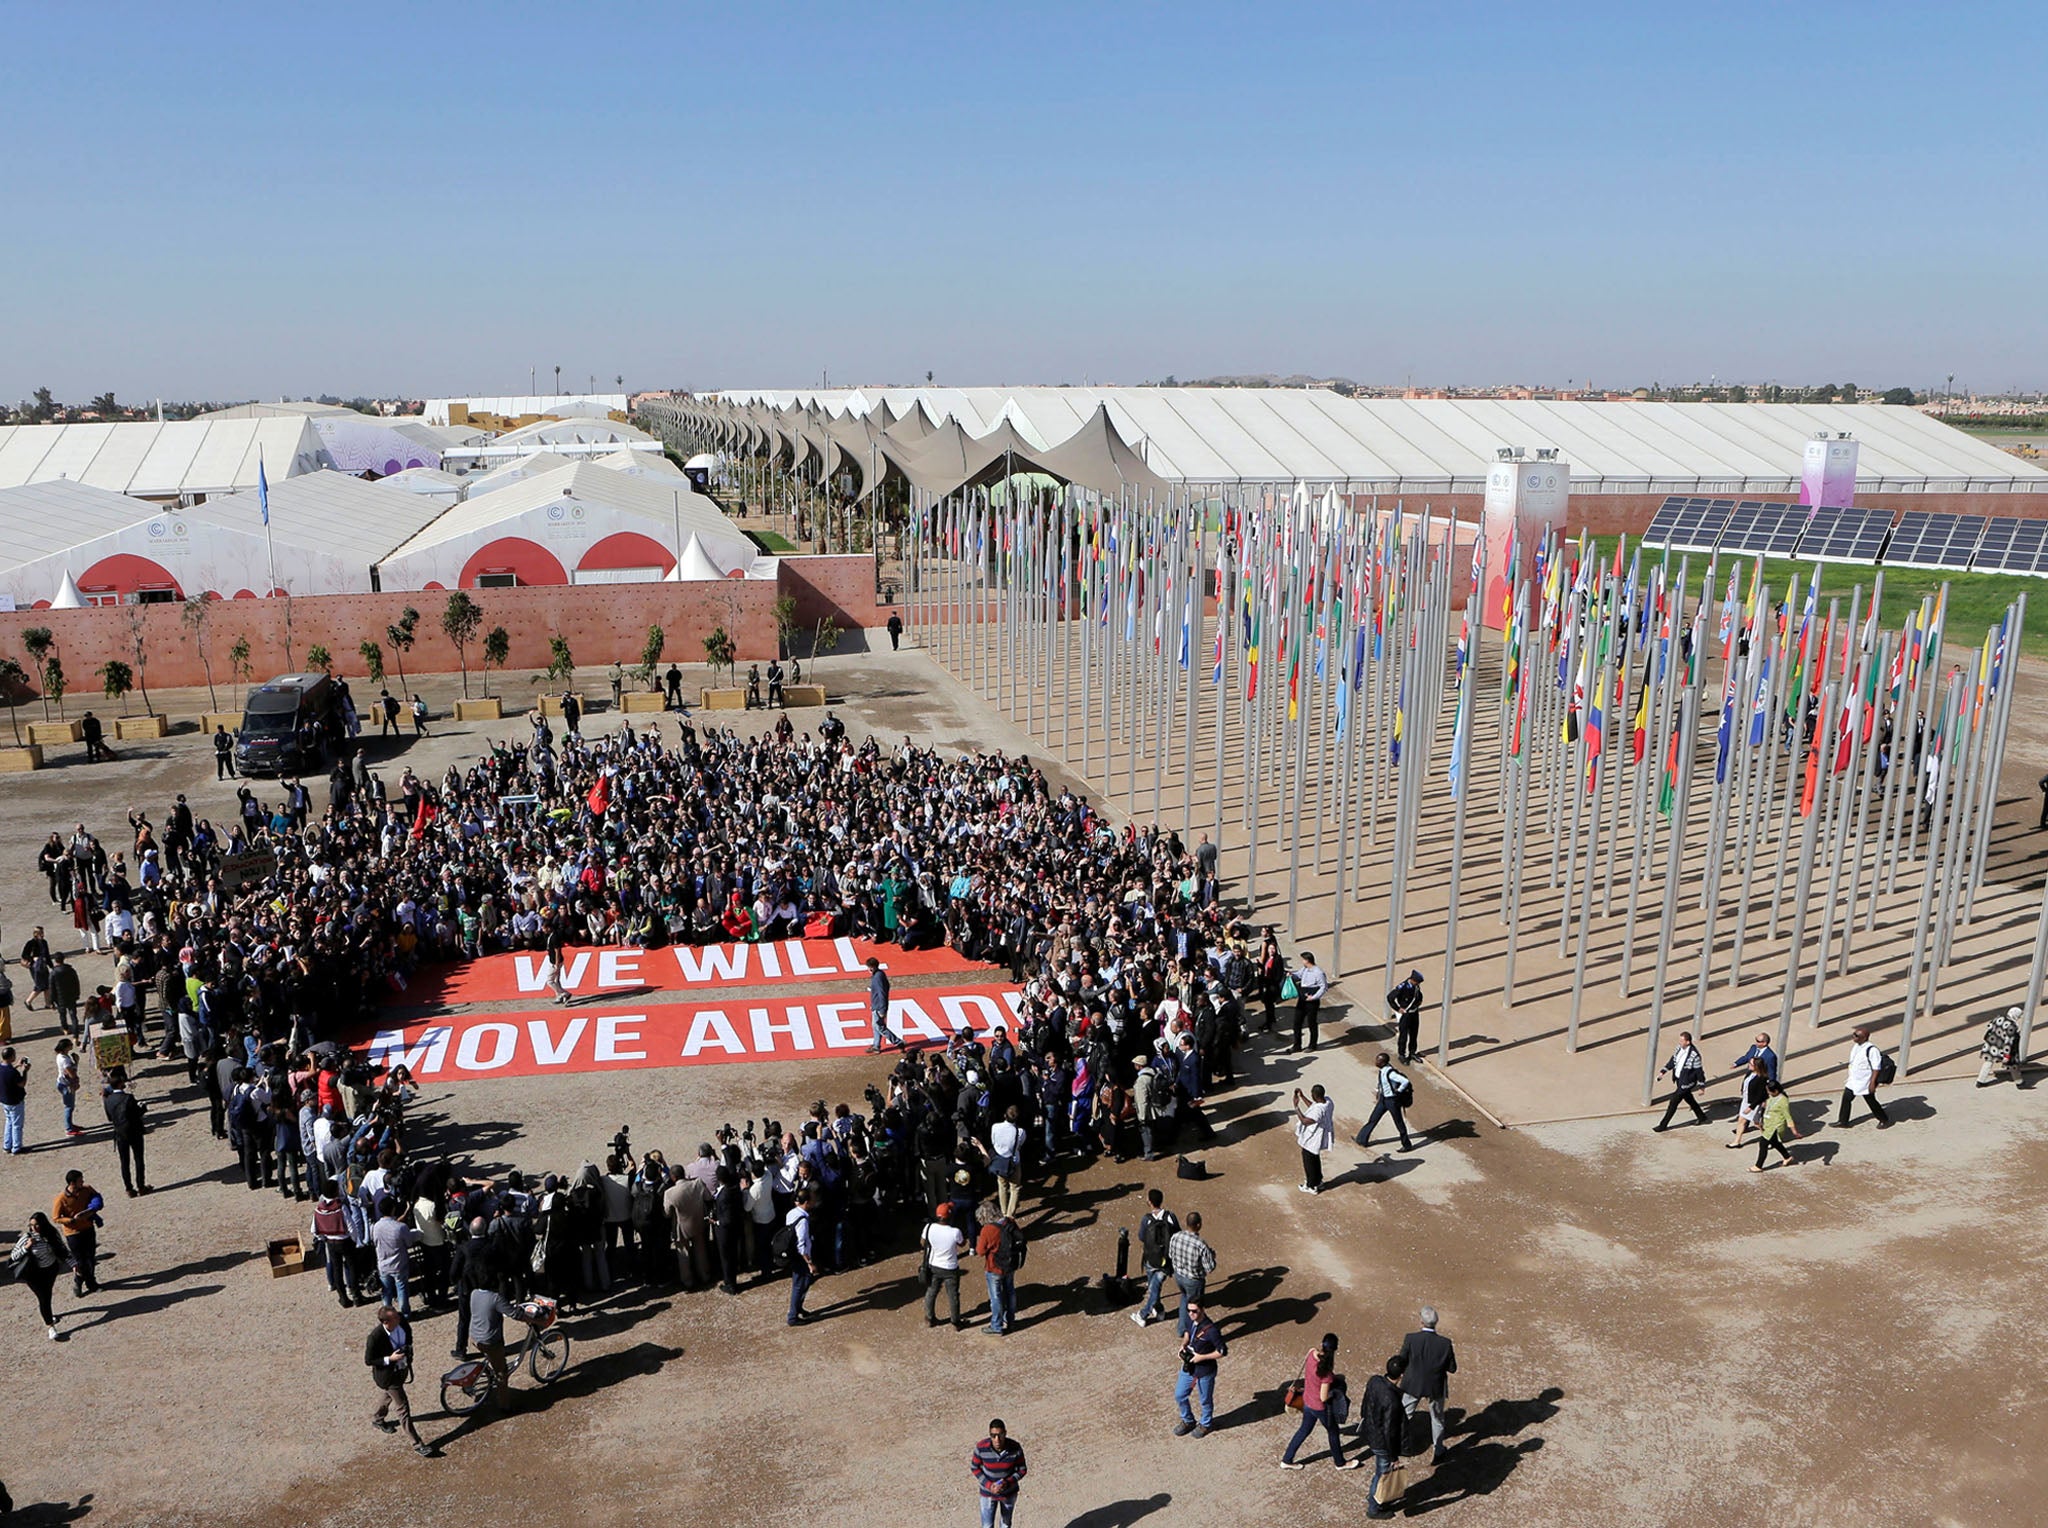 Greenpeace stage a protest outside the UN Climate Change Conference 2016 (COP22) in Marrakech, Morocco